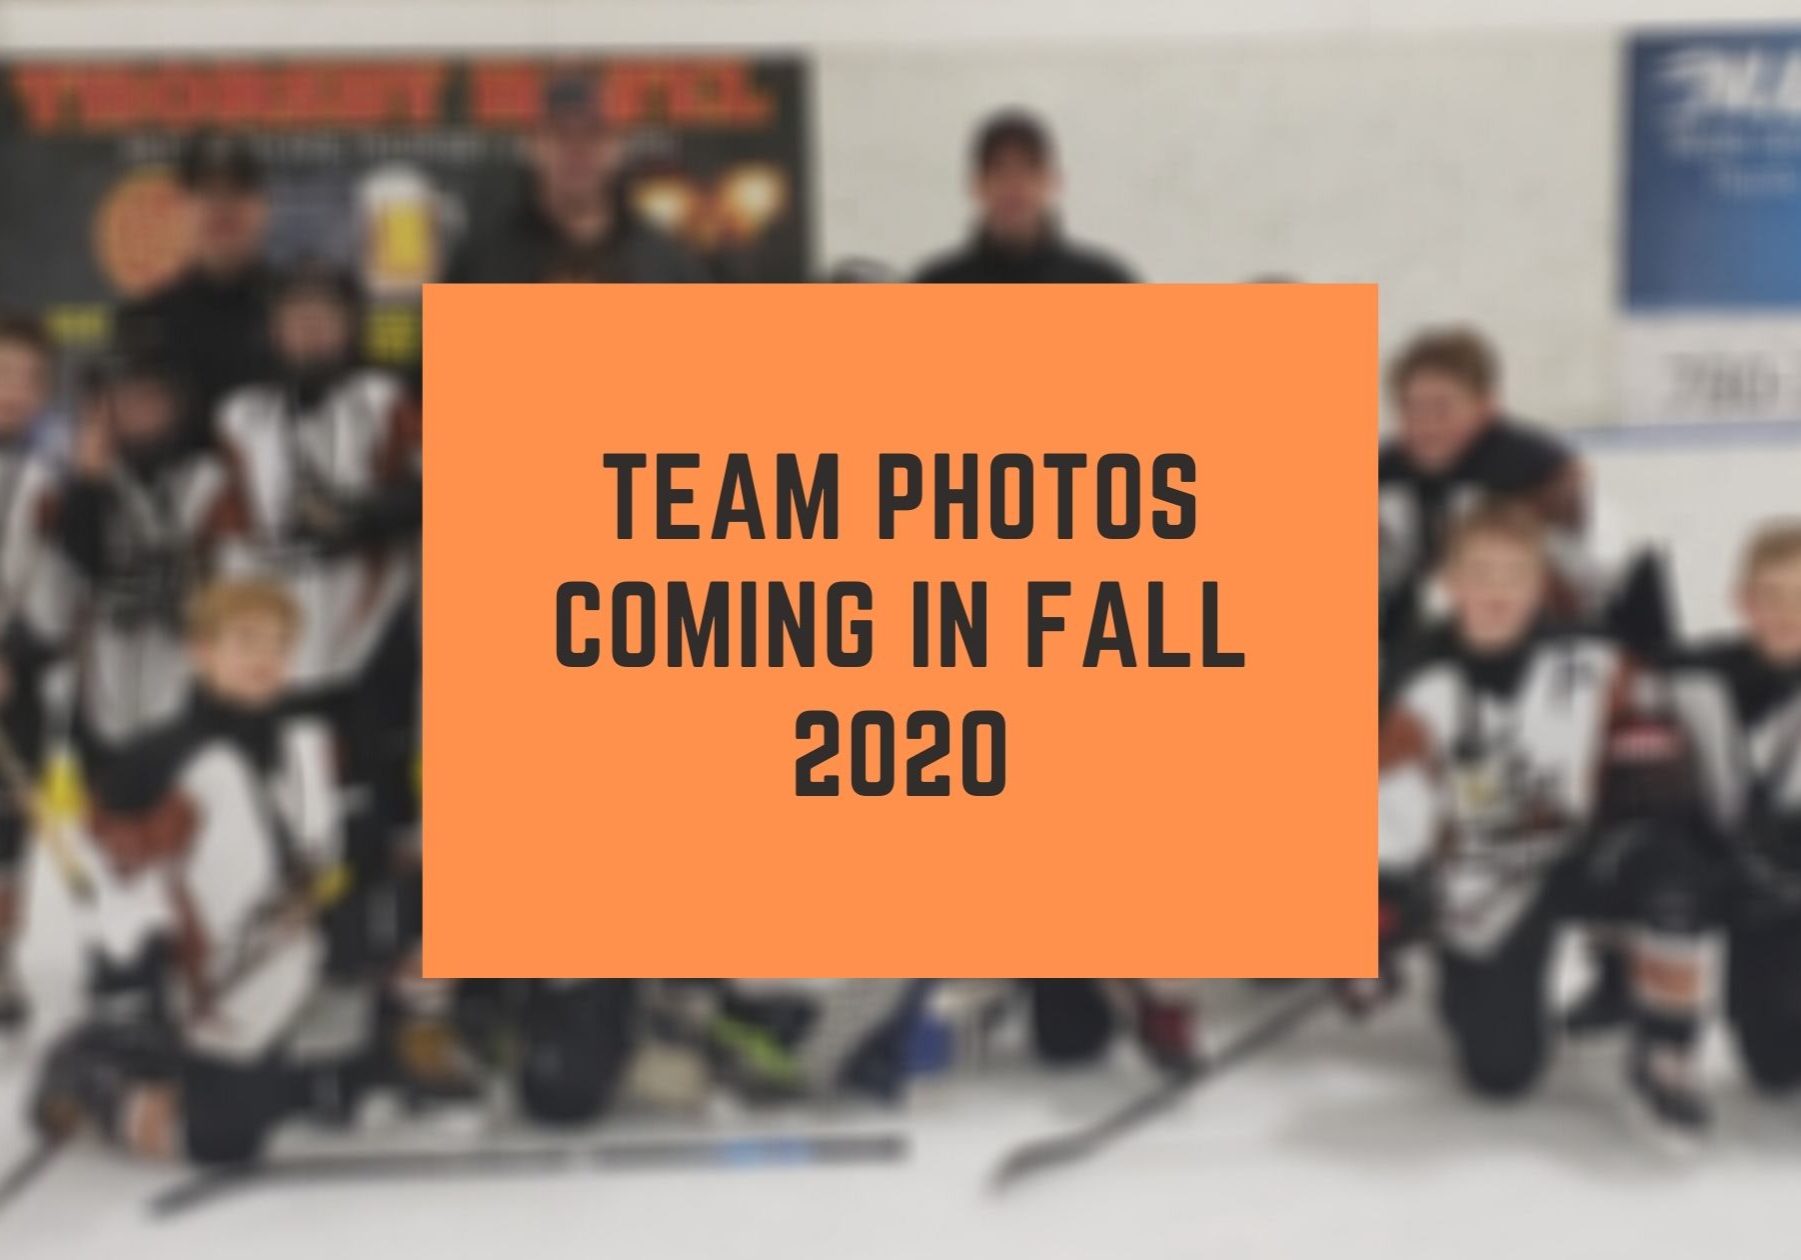 Team photos coming in fall 2020